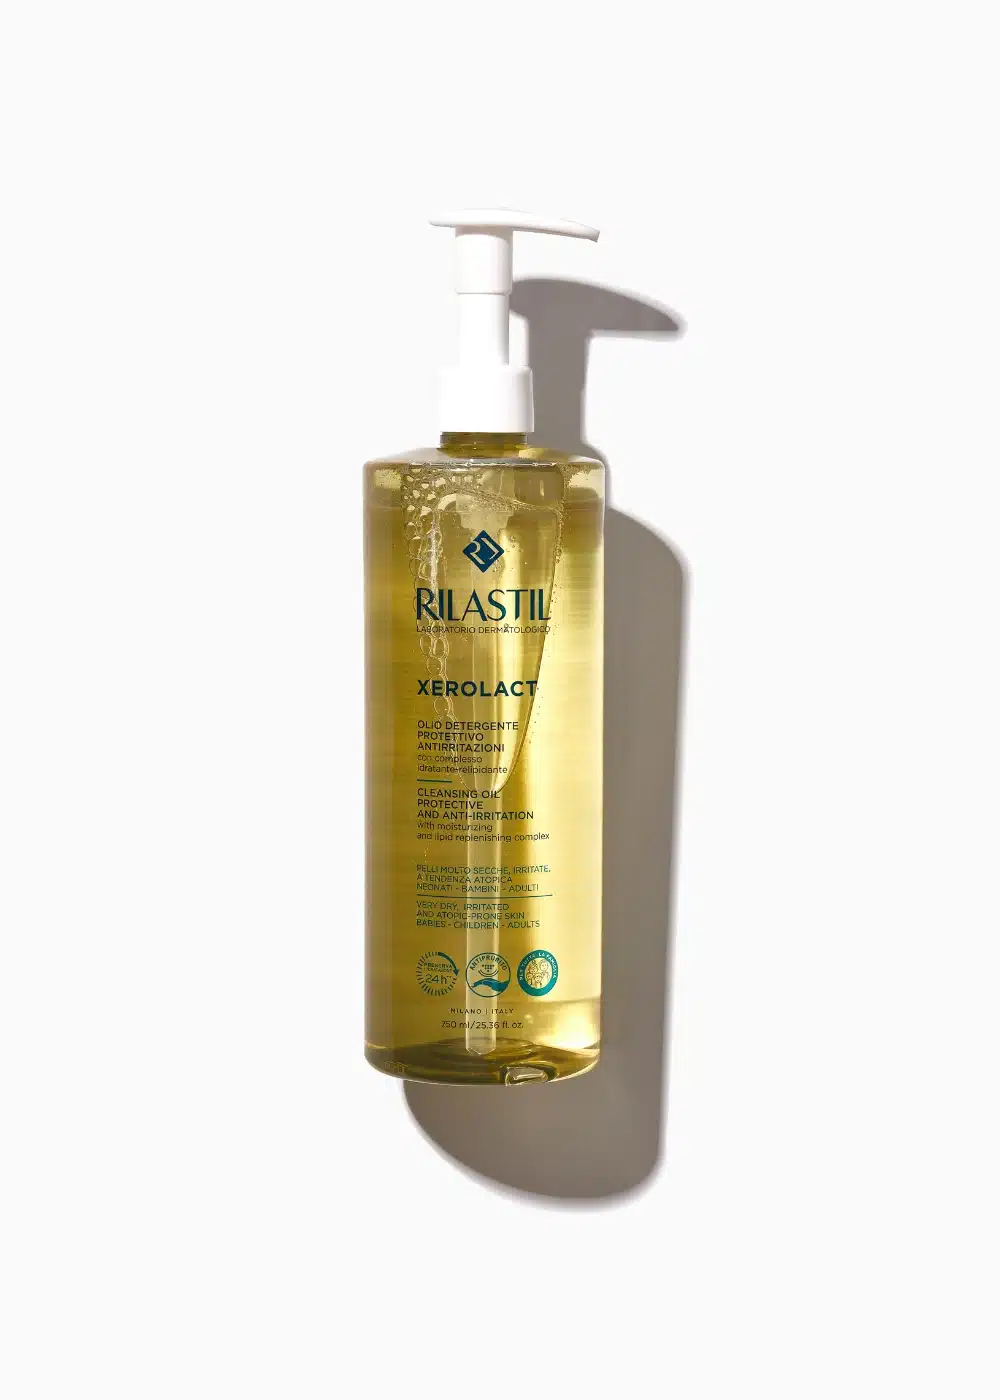 Rilastil Xerolact Cleansing Oil Protective and Anti-Irritation 750ml - Dr  Brands